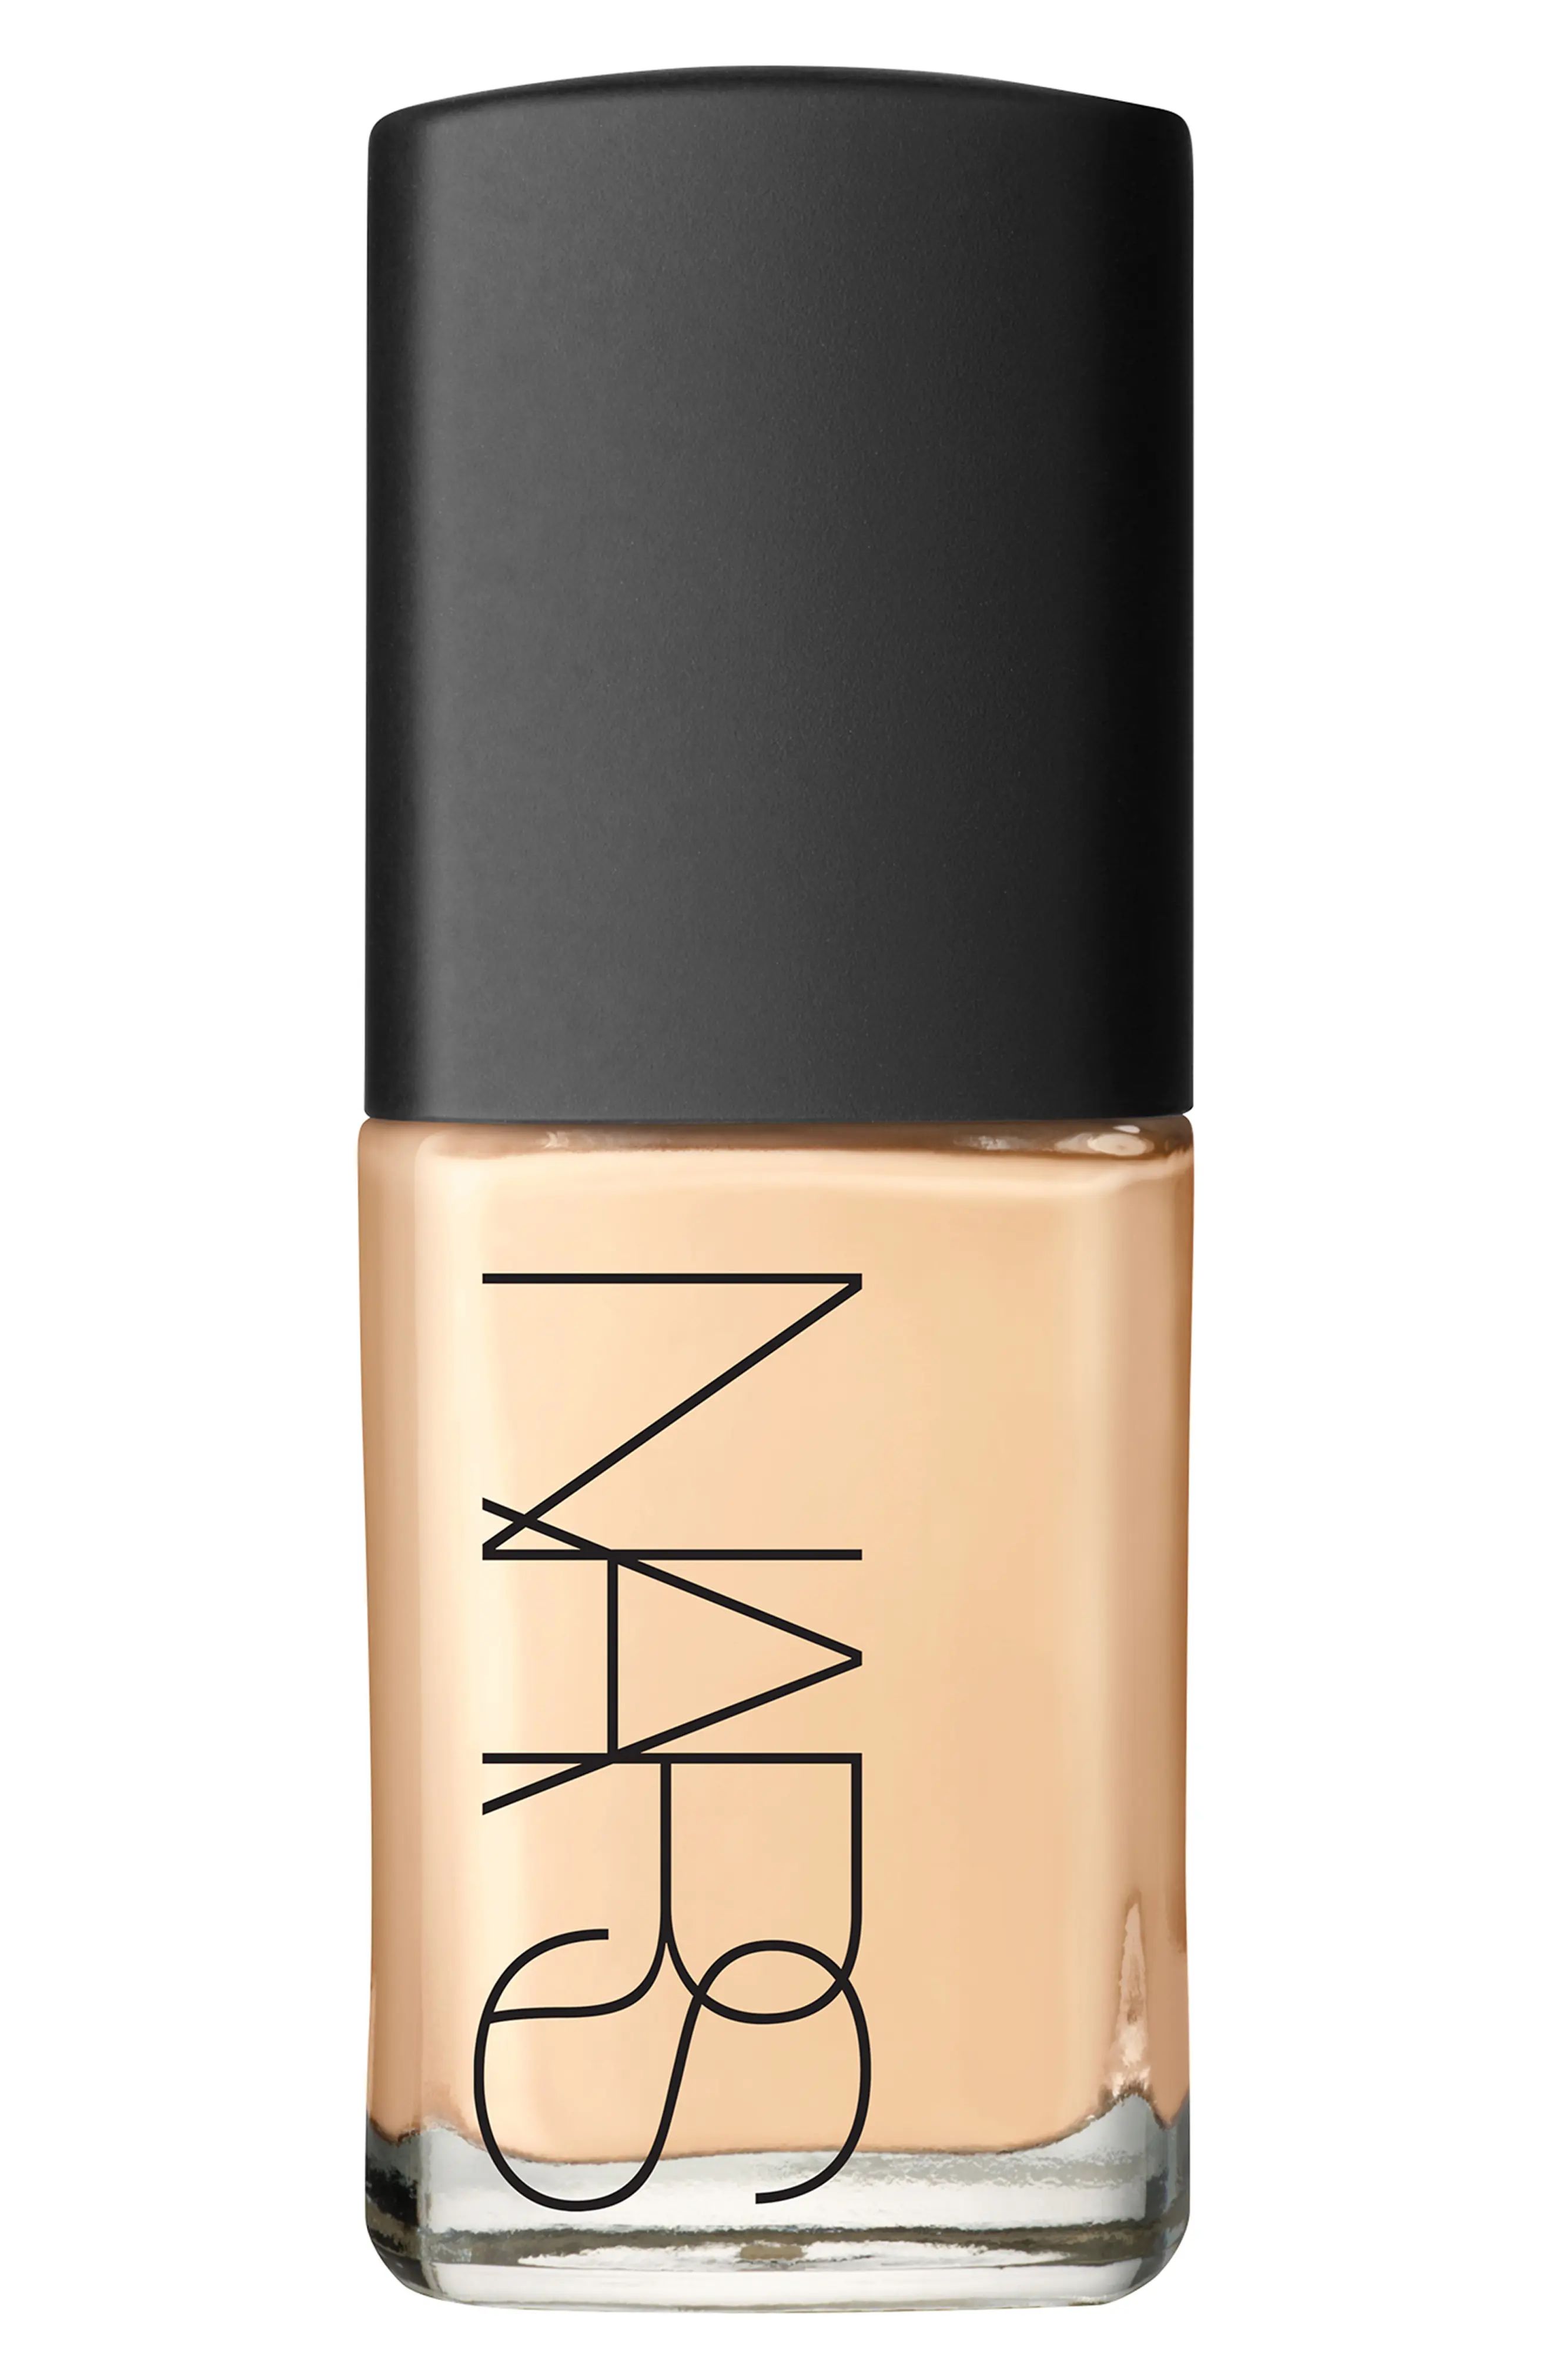 Nars Sheer Glow Foundation - Deauville | Nordstrom